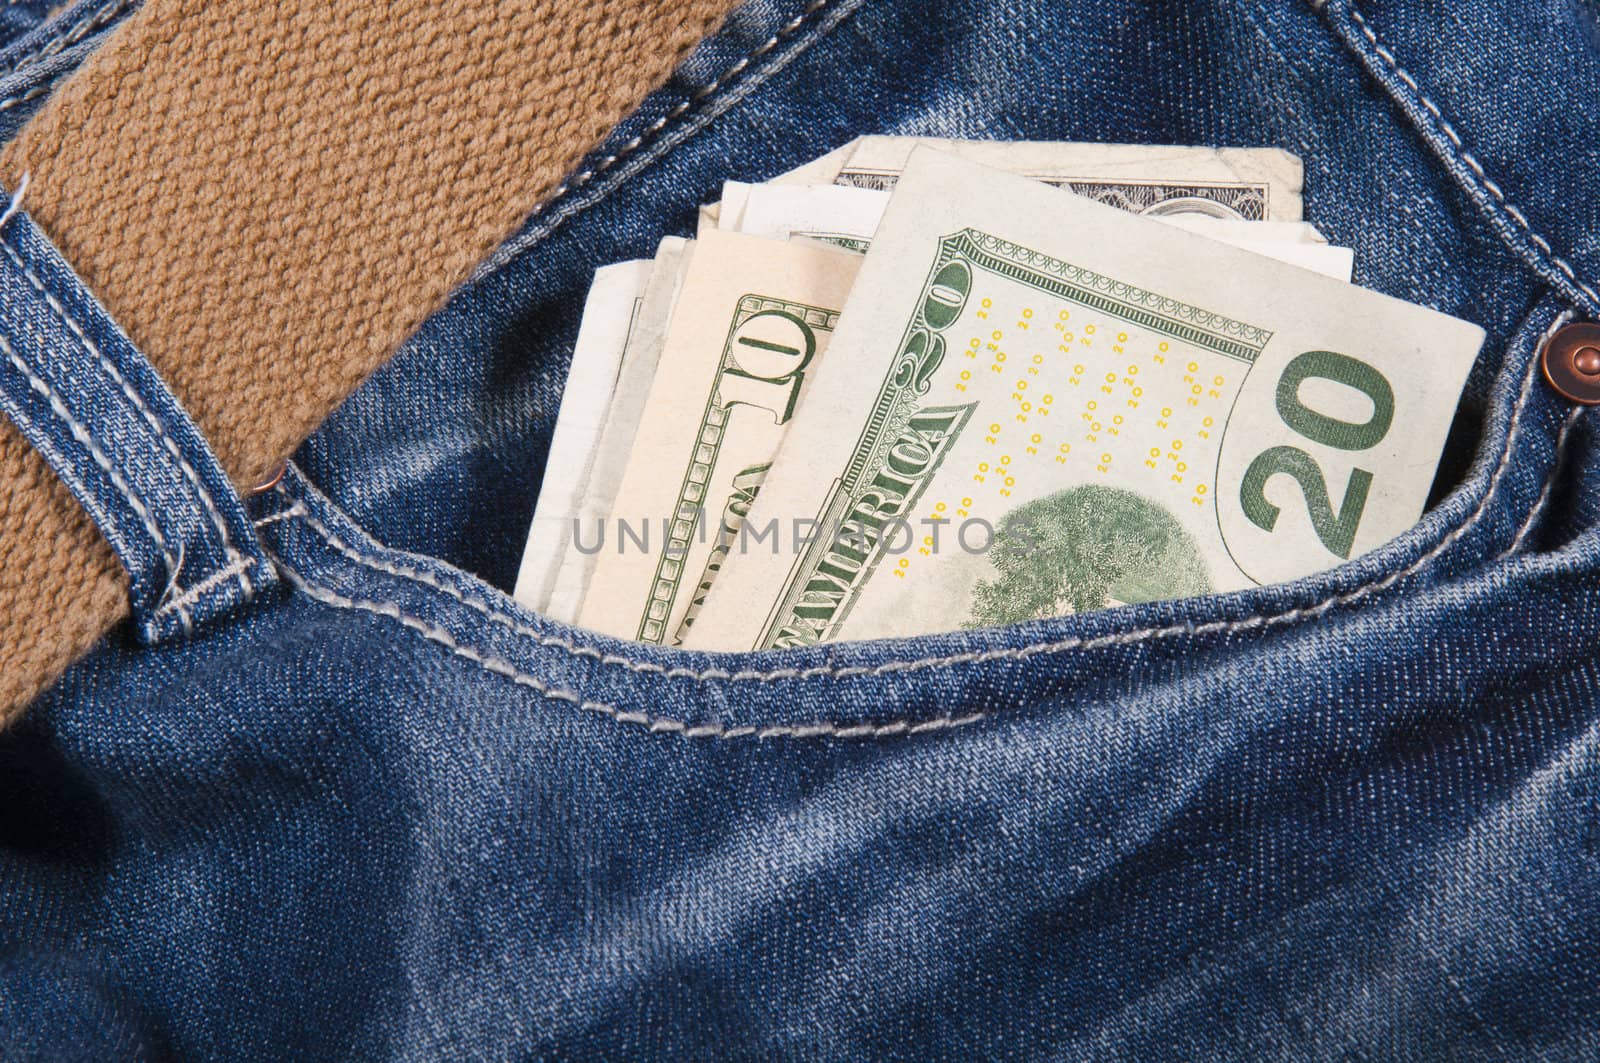 New jeans and money in a pocket.